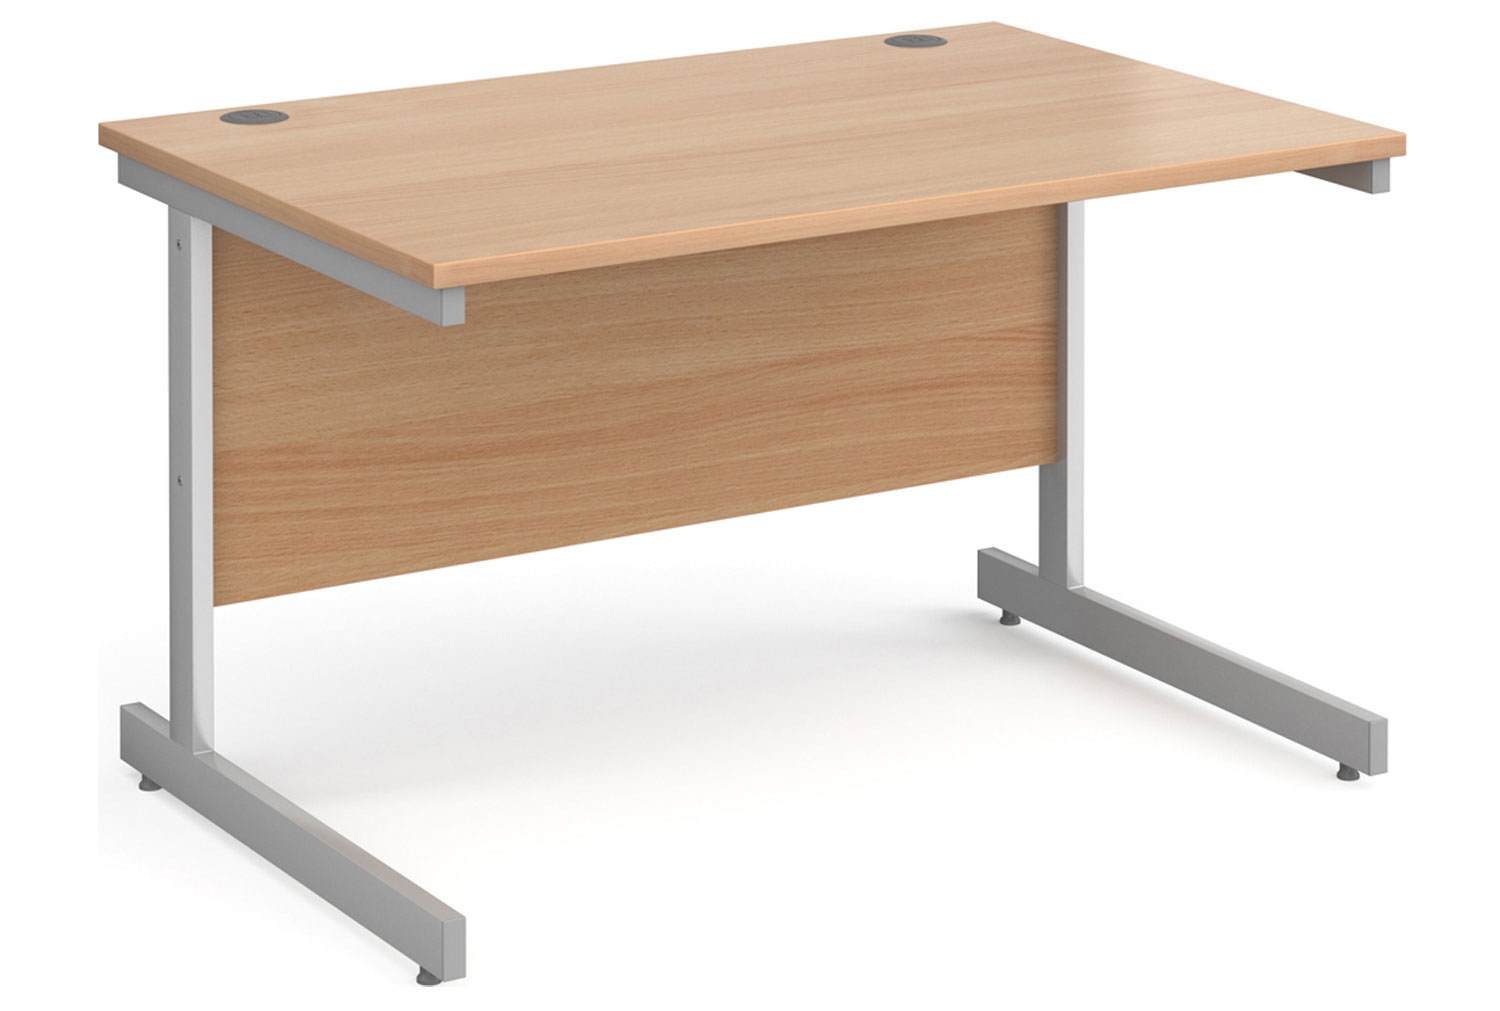 Thrifty Next-Day Rectangular Office Desk Beech, 120wx80dx73h (cm), Express Delivery